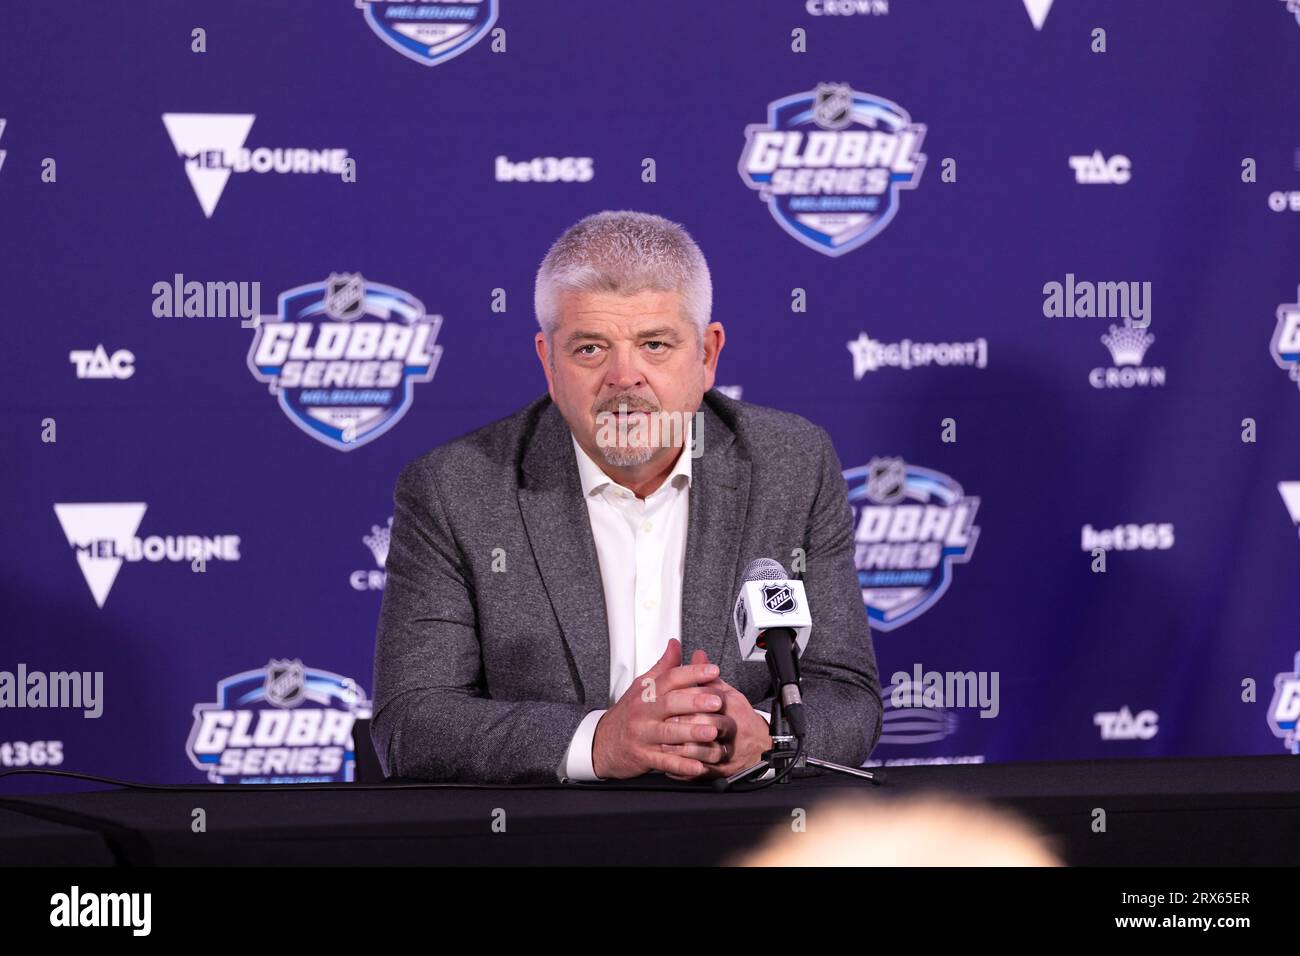 Melbourne, Australia, 23 September, 2023. Los Angeles Kings Head Coach Todd McLellan speaks at the press conference during the NHL Global Series match between The Los Angeles Kings and The Arizona Coyotes at Rod Laver Arena on September 23, 2023 in Melbourne, Australia. Credit: Dave Hewison/Speed Media/Alamy Live News Stock Photo